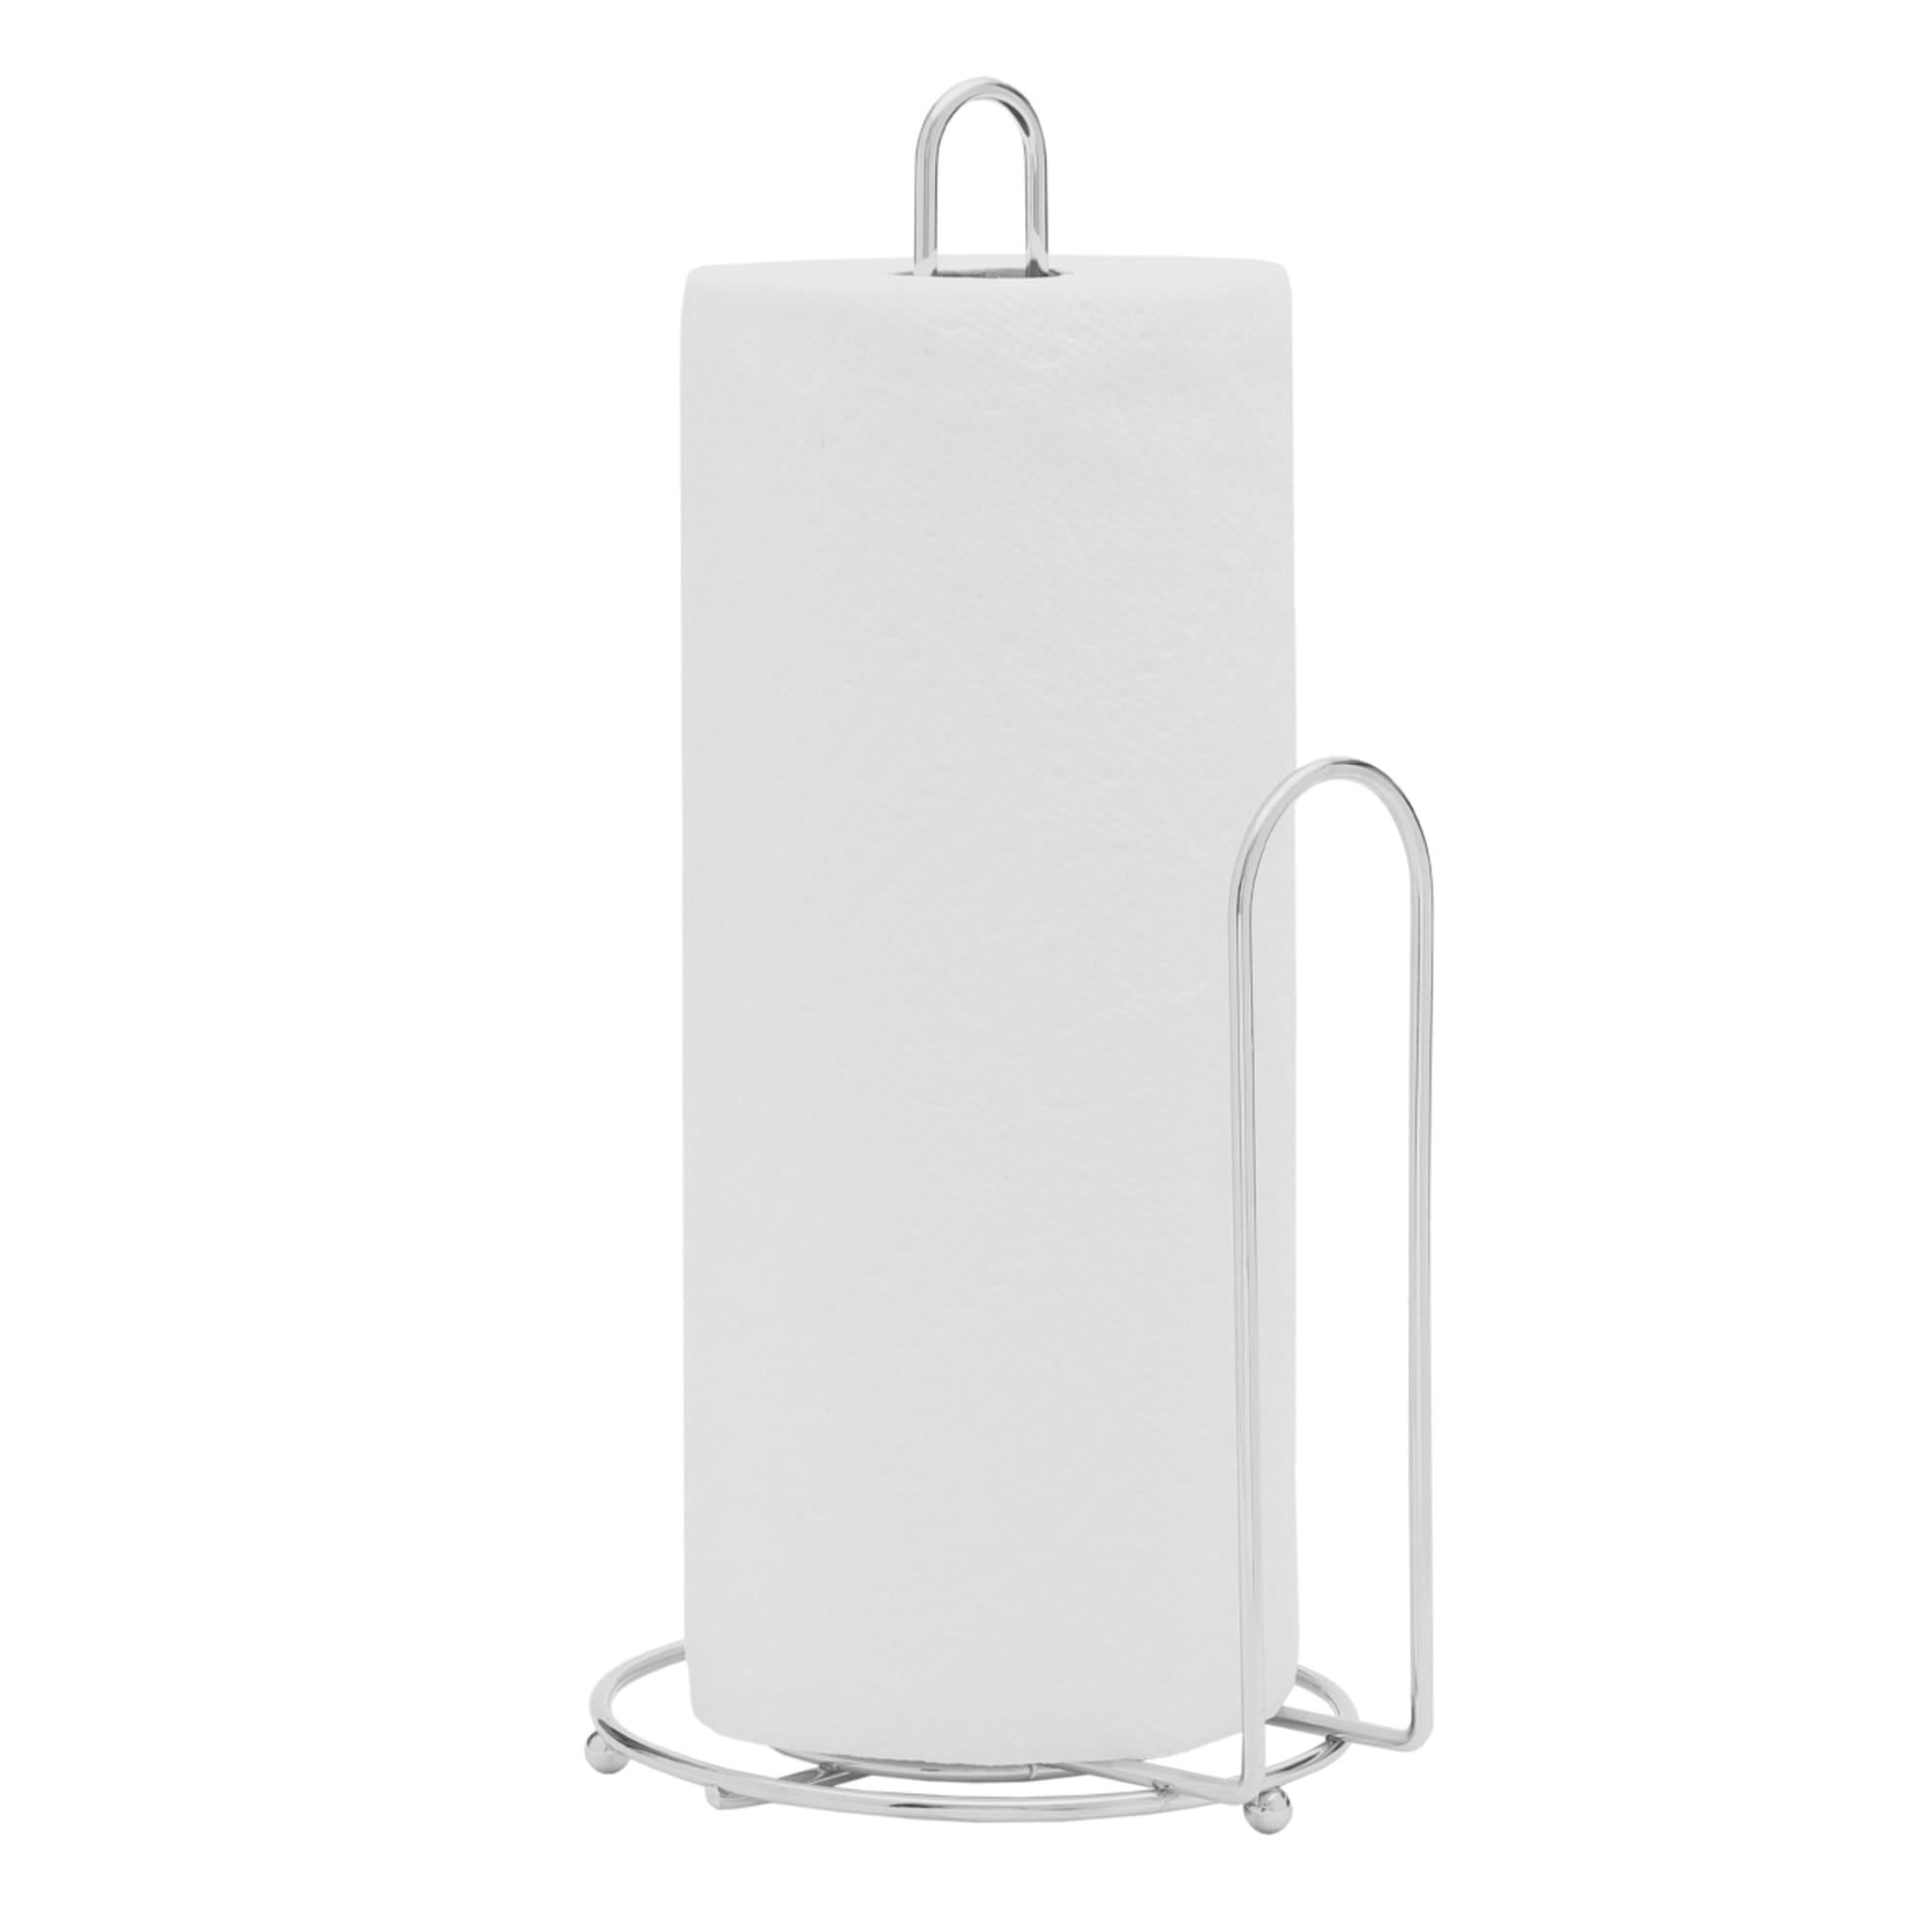 Home Basics Chrome Collection Free Standing Paper Towel Holder with Easy-Tear Arm, Chrome $3.00 EACH, CASE PACK OF 24